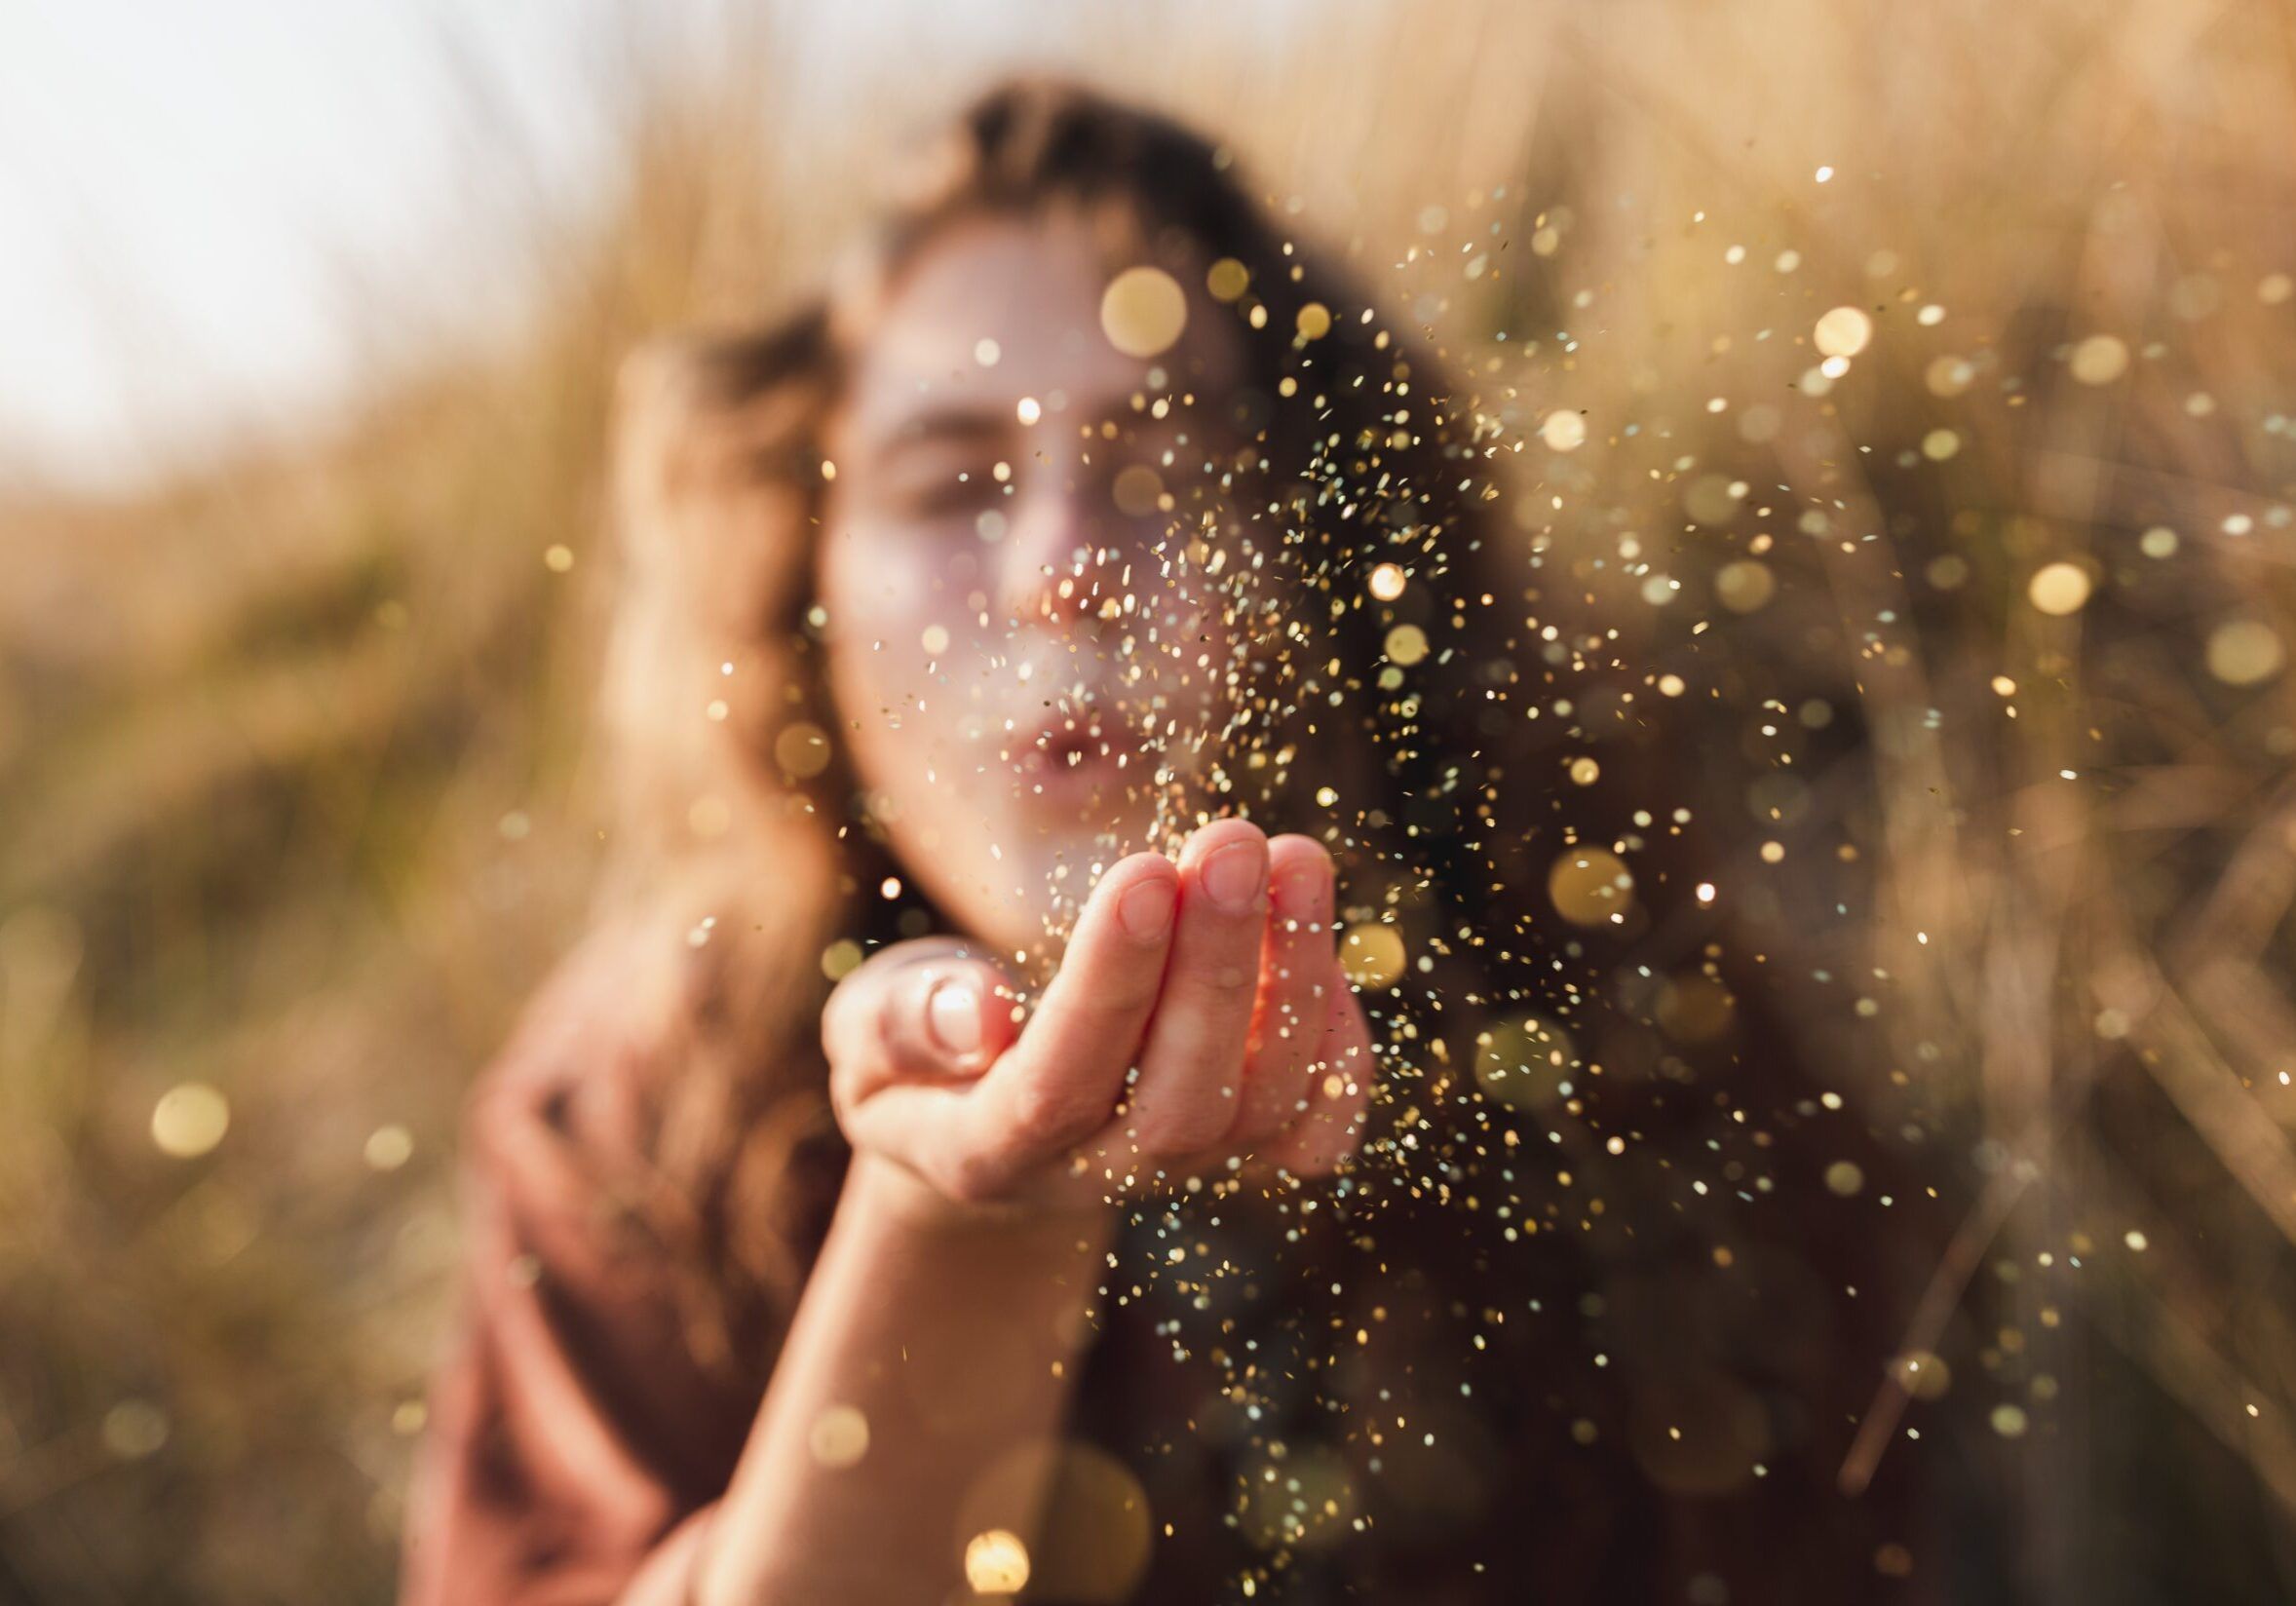 A beautiful shot of a model blowing glitter from her hand